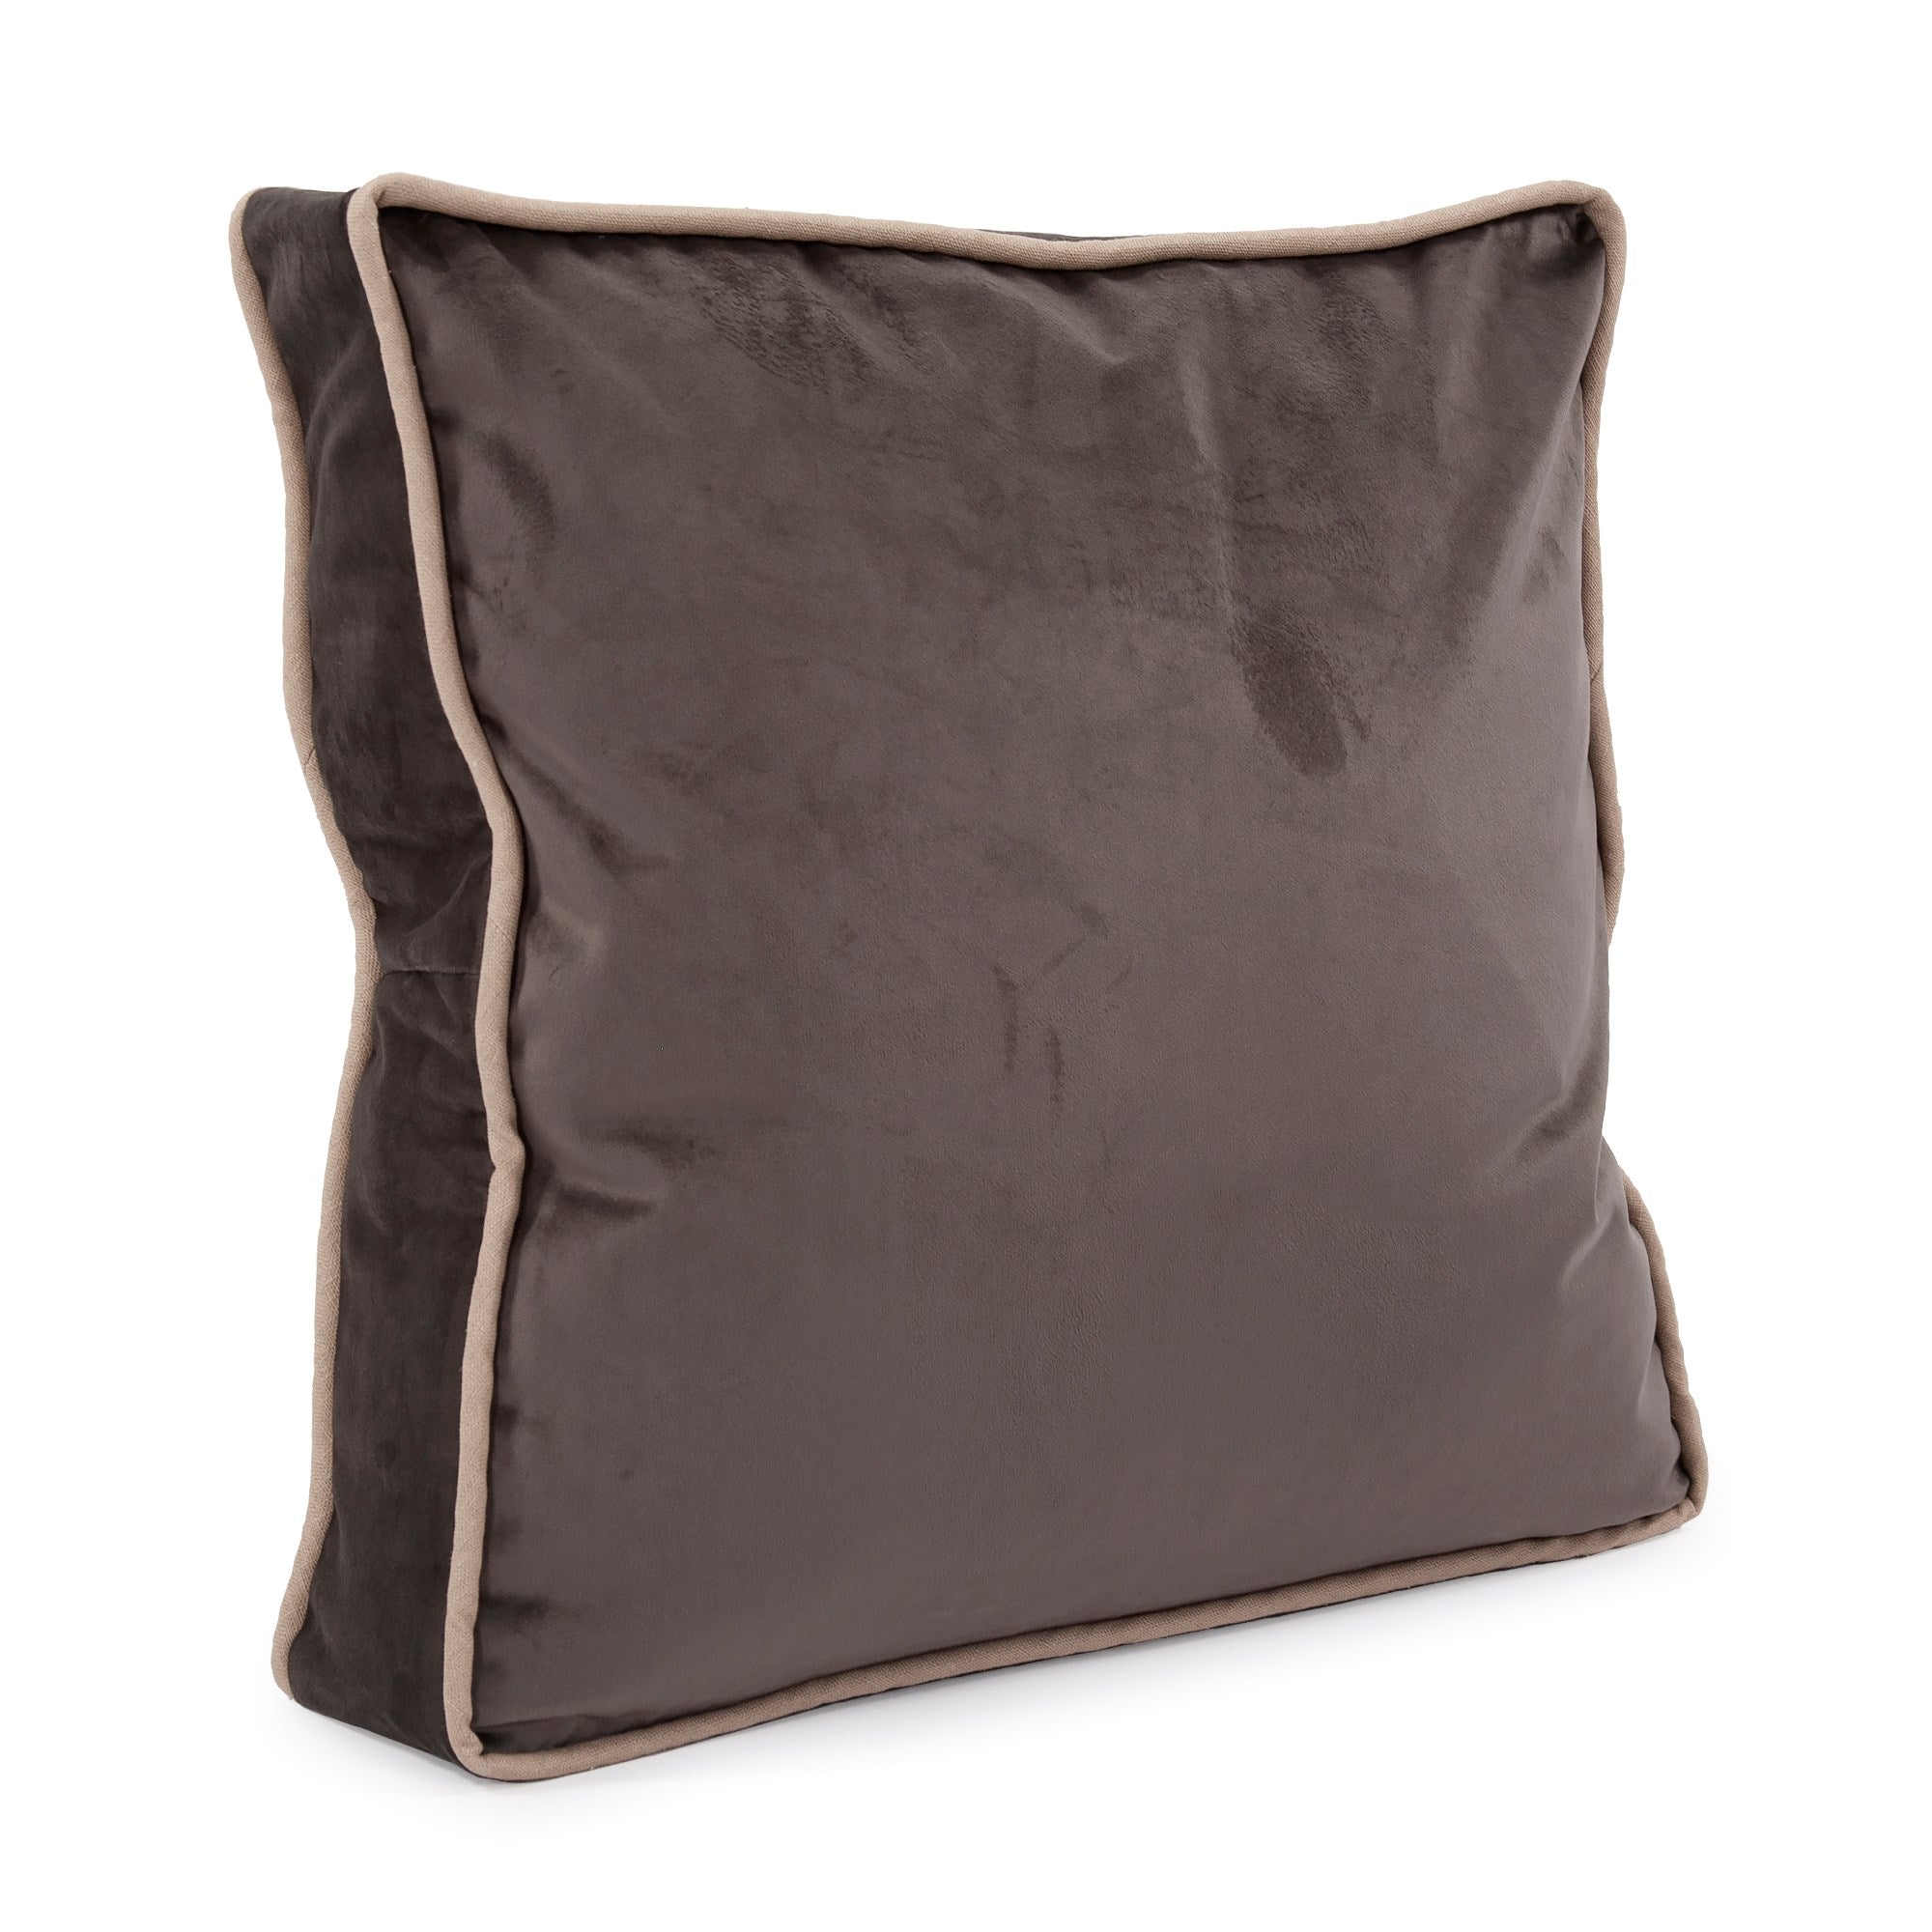 Gusseted Bella Pewter Down Pillow- 20" x 20"